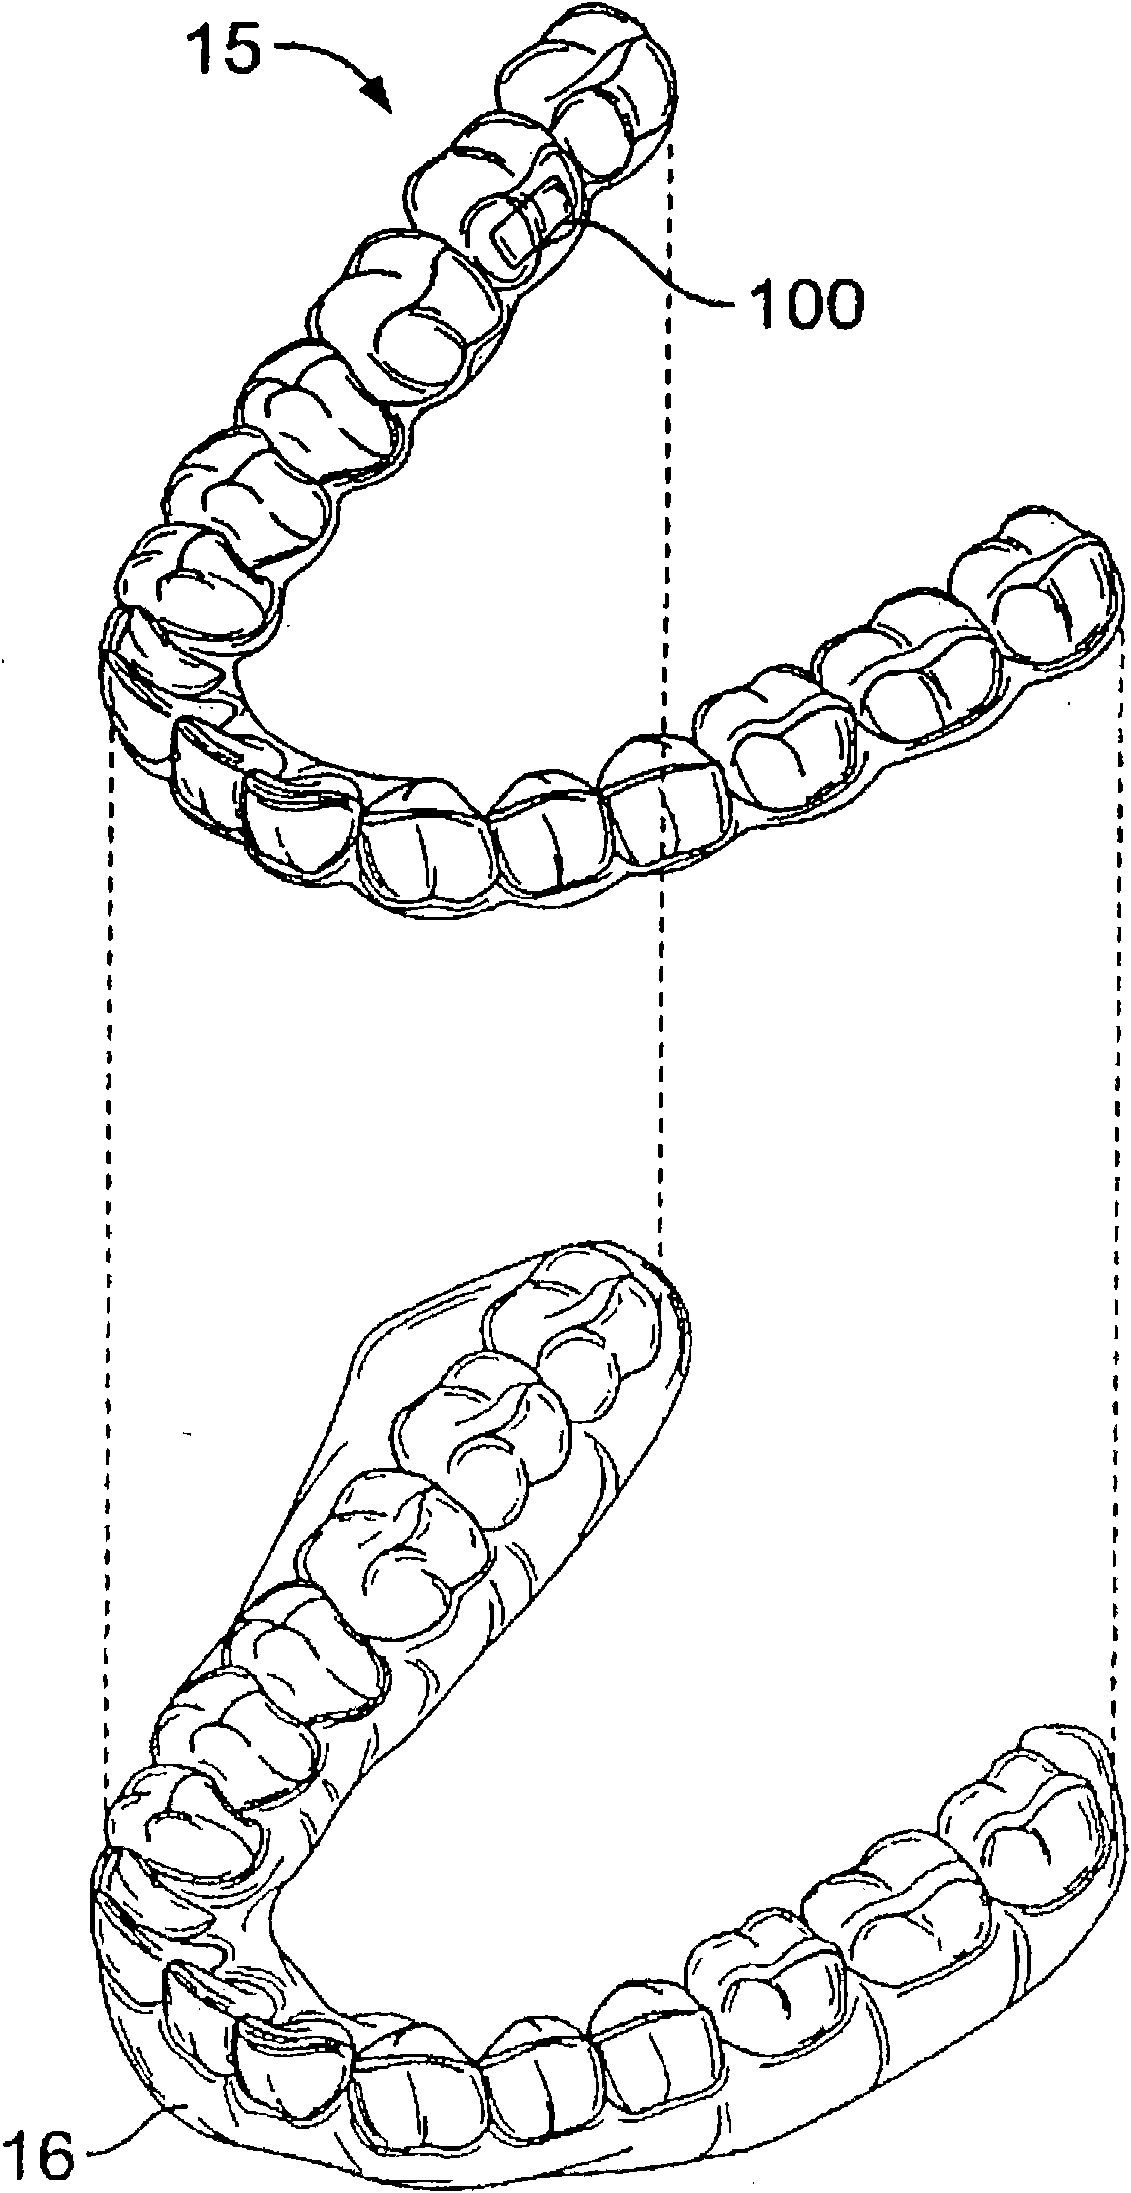 Dental appliance wear indication and release agent receptacle